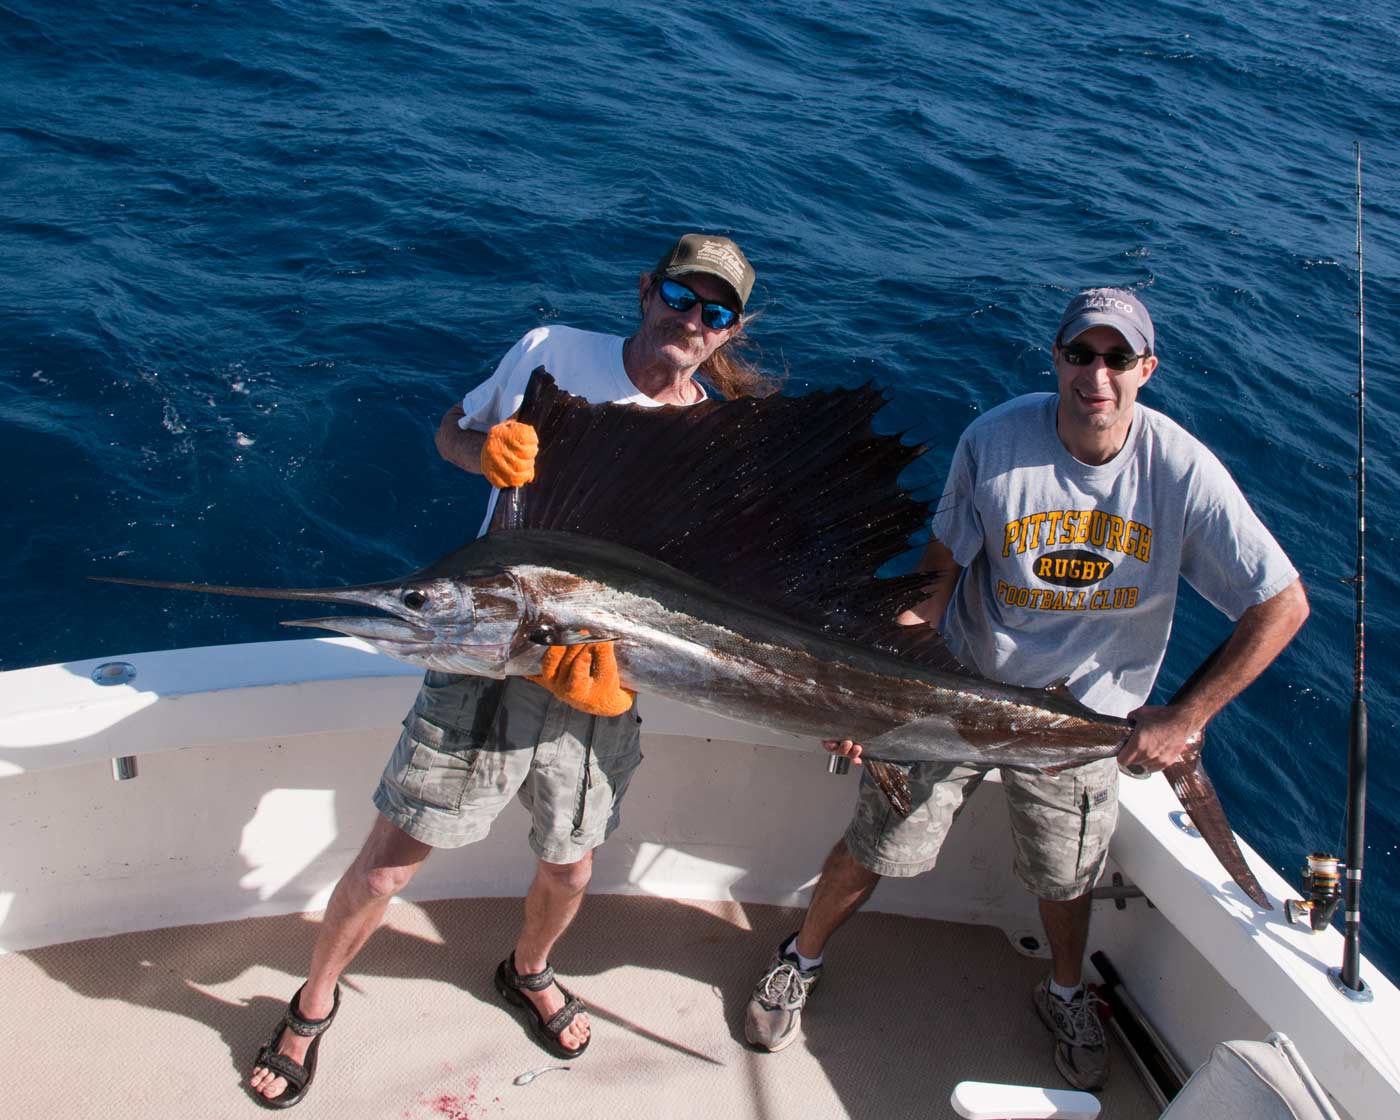 Kevin Groll and his fearless mate Captain Mike Hancock with Kevin's first sailfish, on his first sailfish trip!